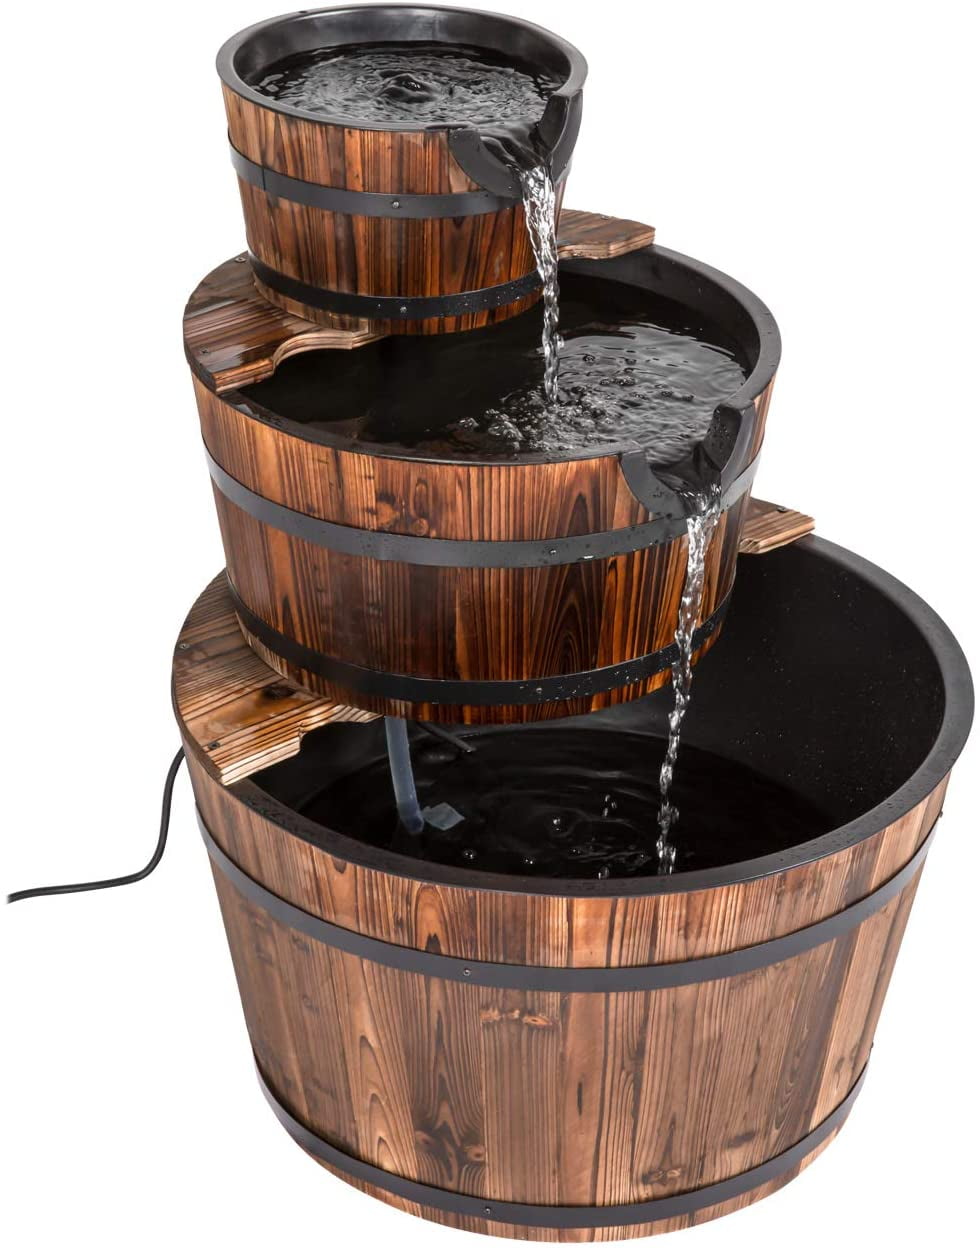 Outdoor Garden Rustic Wood Barrel Waterfall Fountain with Electric Pump 3 Style 